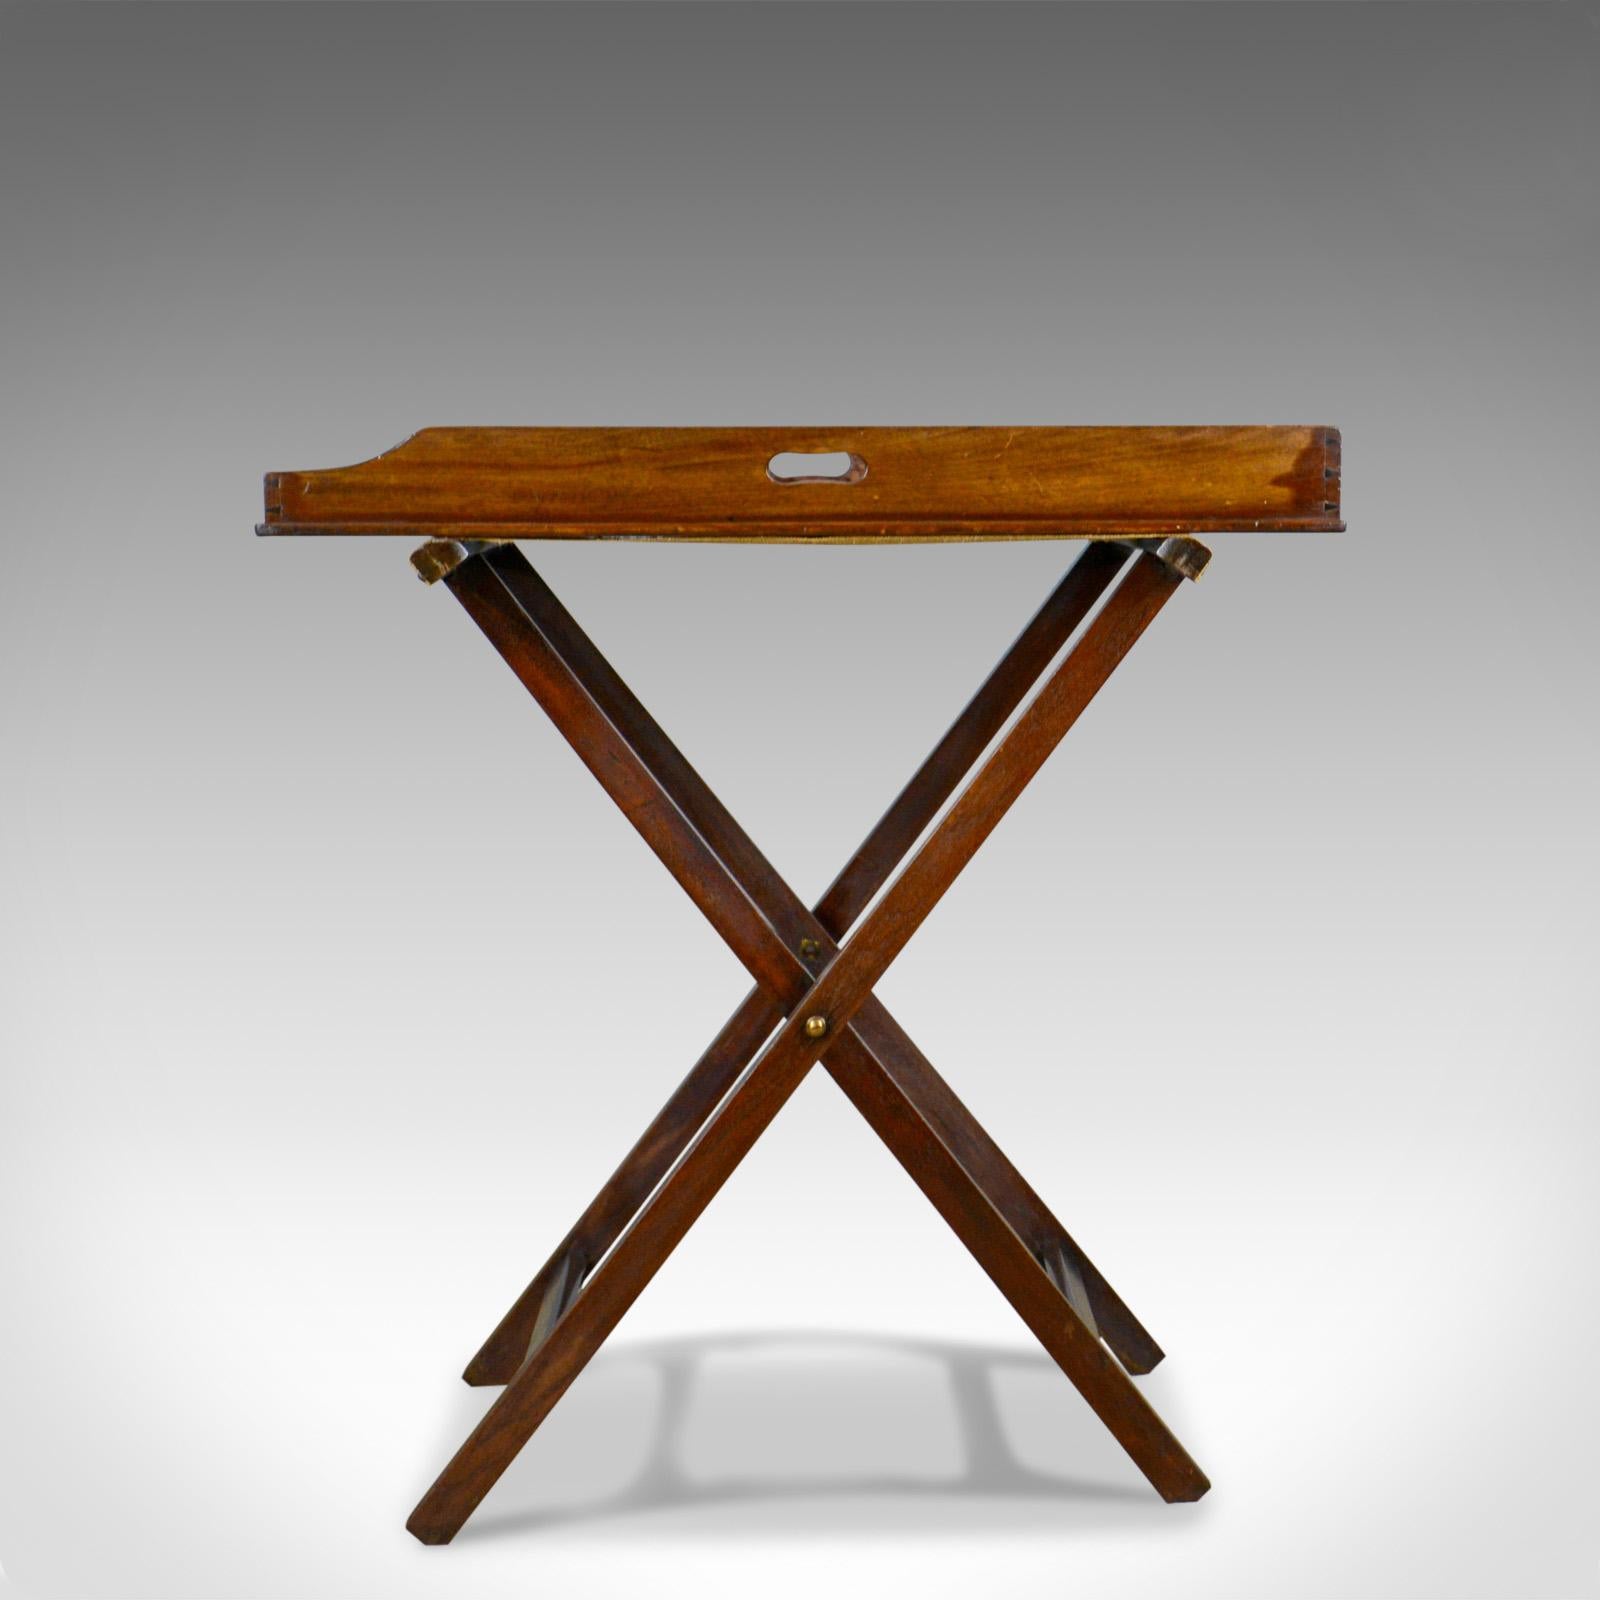 This is an antique butler's tray table, an English, mahogany tray on folding stand dating to the early 20th century, circa 1900.

In good order with delightful color and tone
Grain interest in the wax polished finish
Easily folds up for carrying